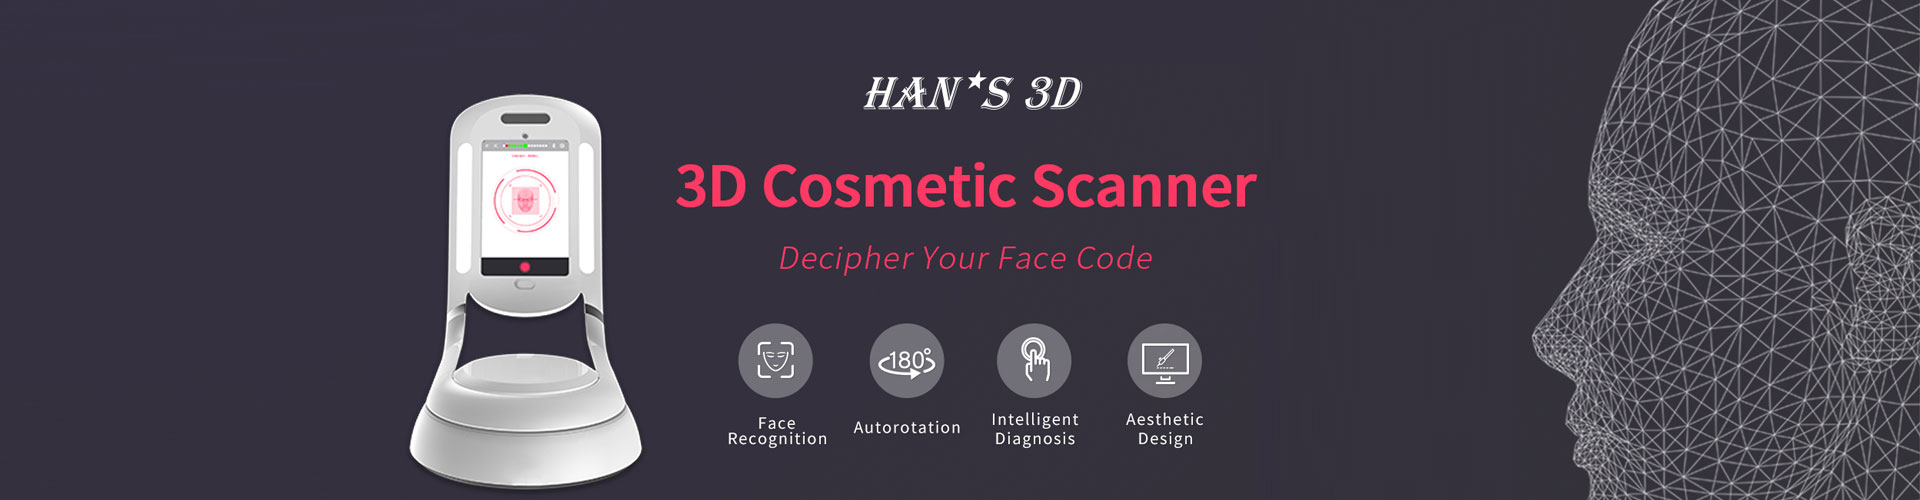 3D Cosmetic Scanner